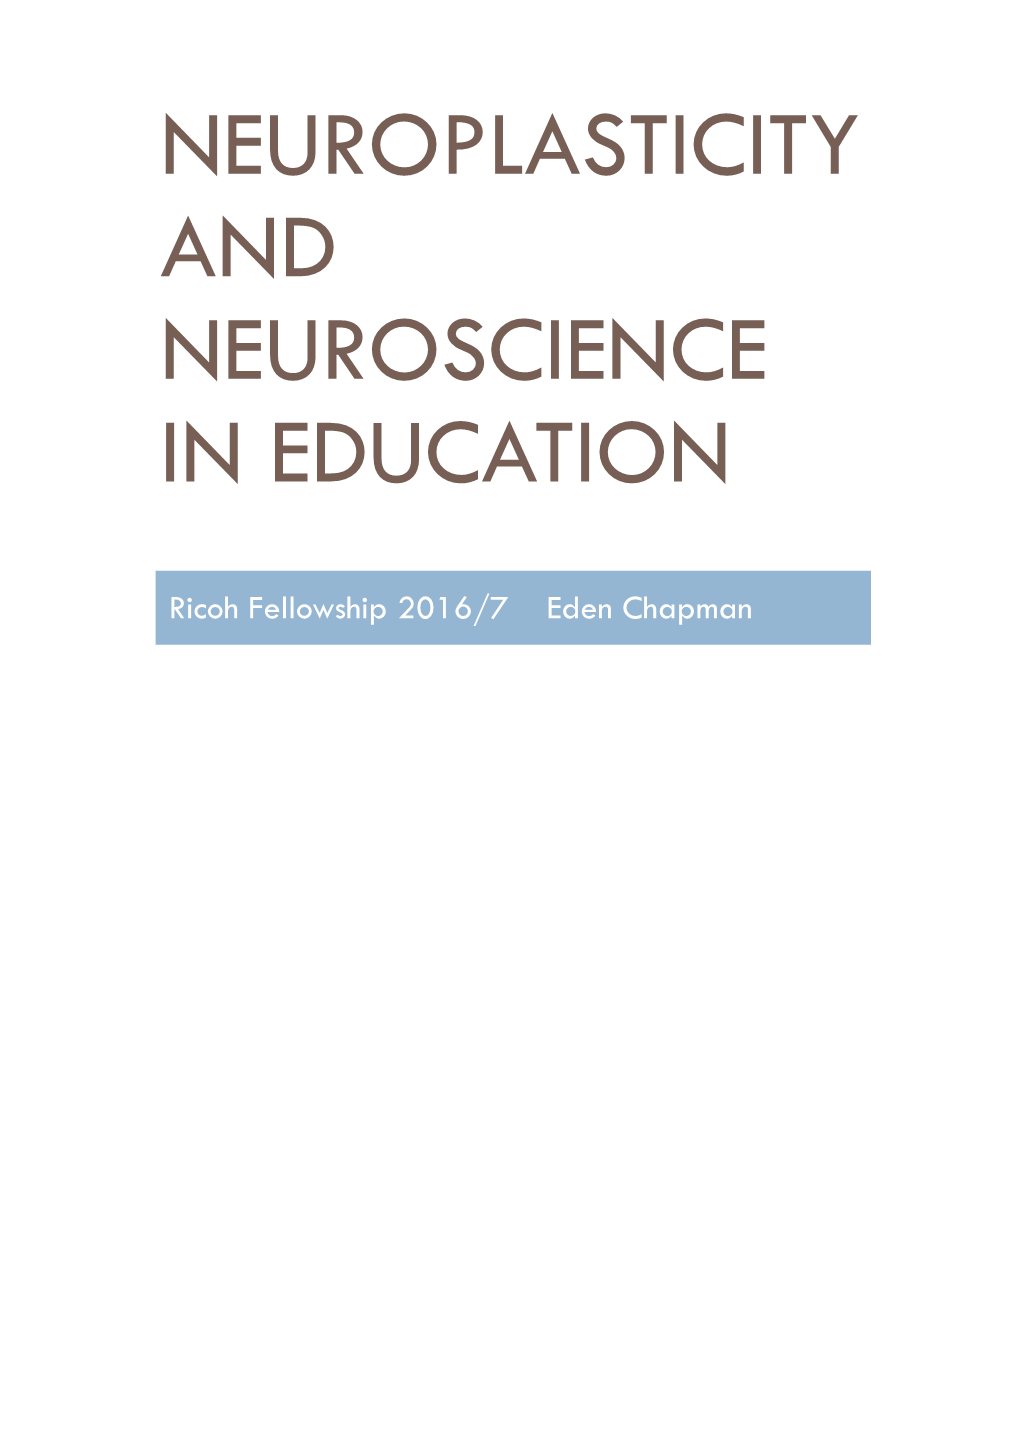 Neuroplasticity and Neuroscience in Education